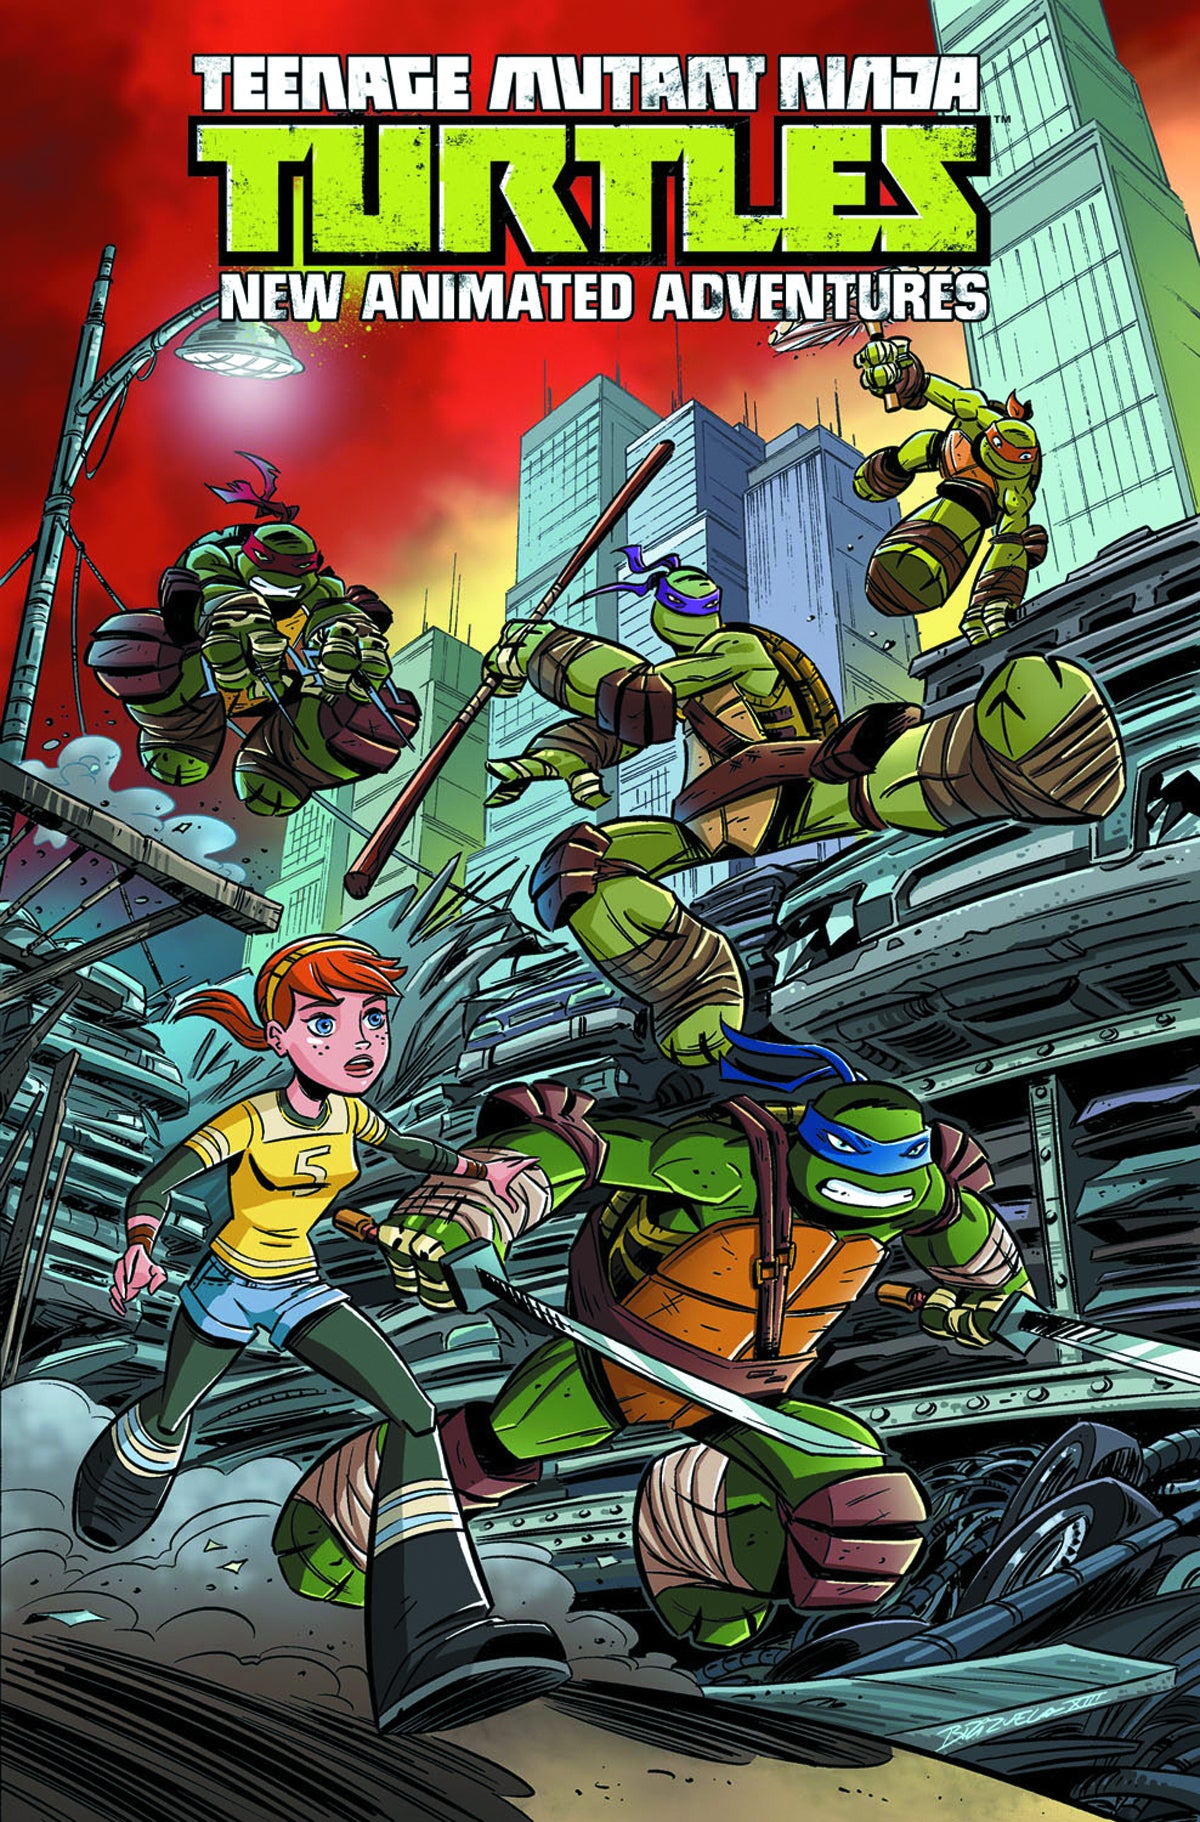 TMNT NEW ANIMATED ADVENTURES TP VOL 01 | Game Master's Emporium (The New GME)